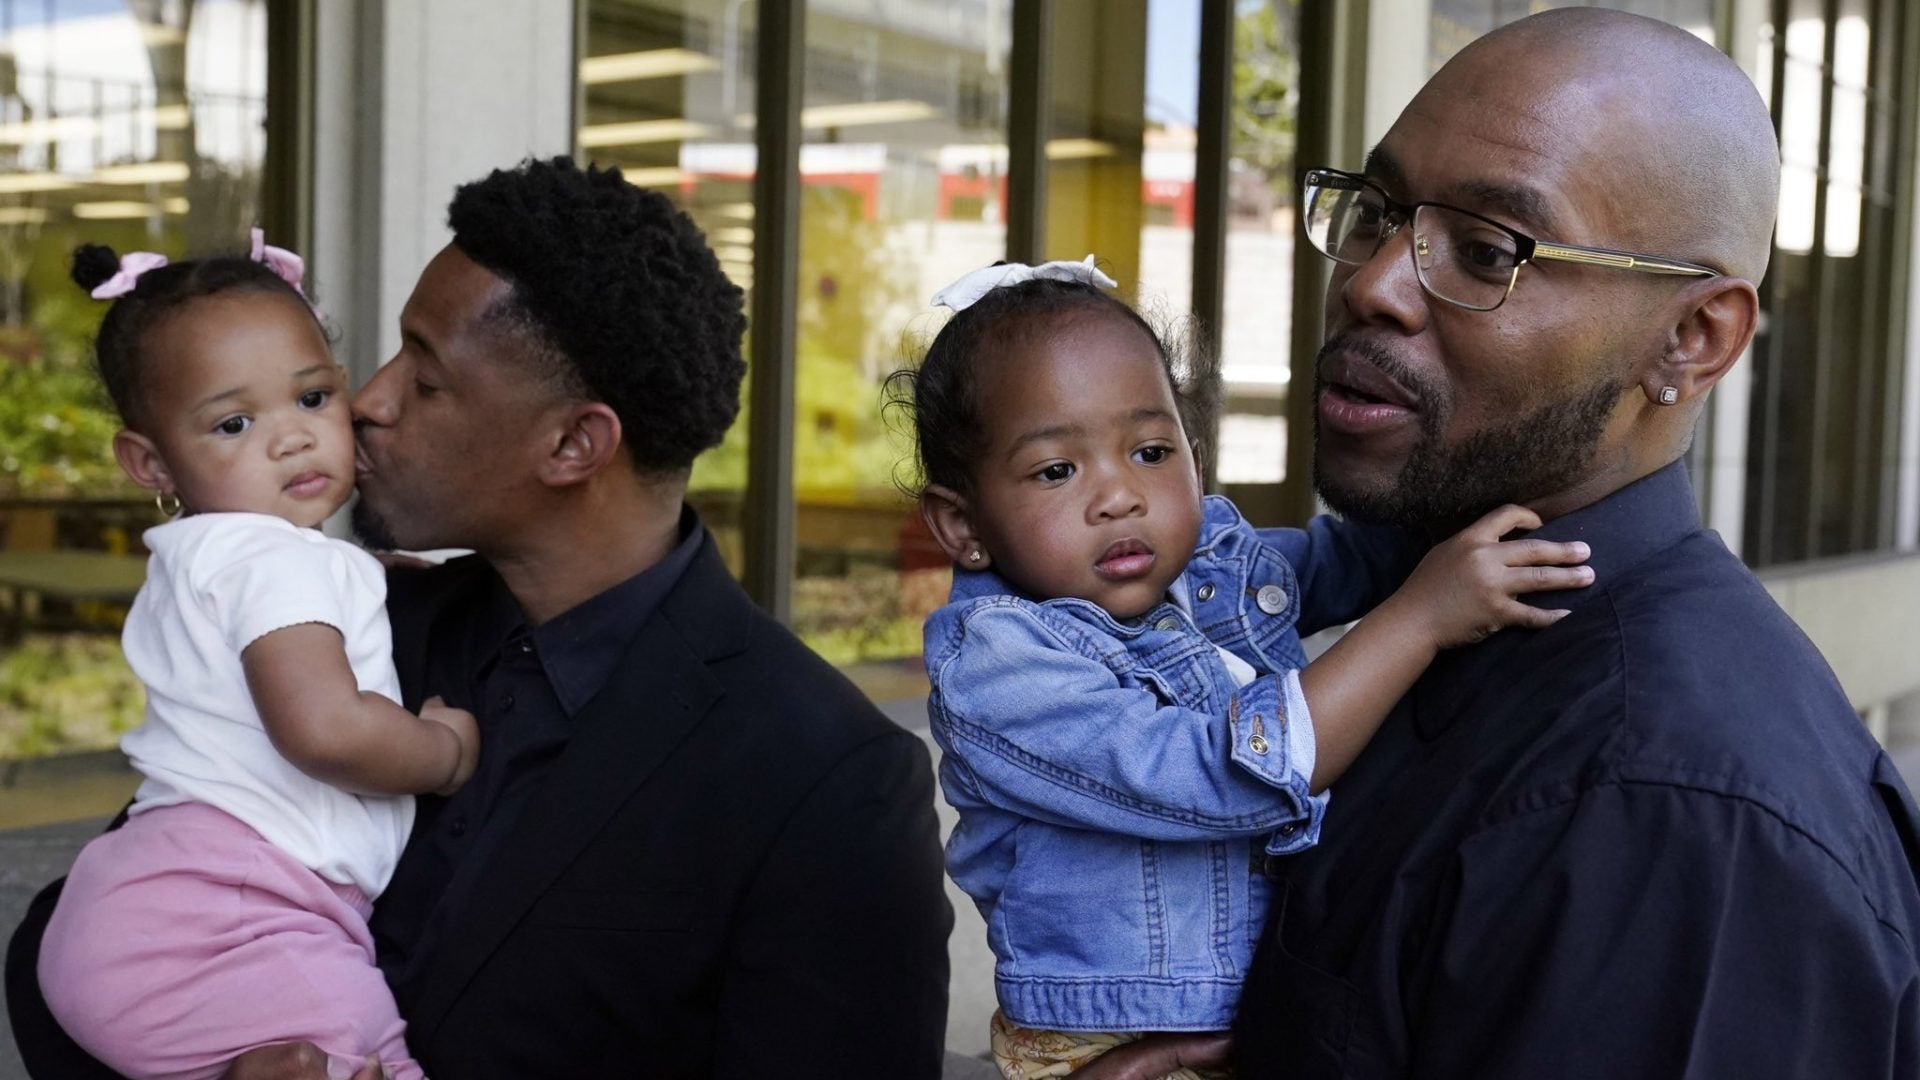 Two Black Men In California Will Be Awarded Almost $900K Each After Wrongful Convictions